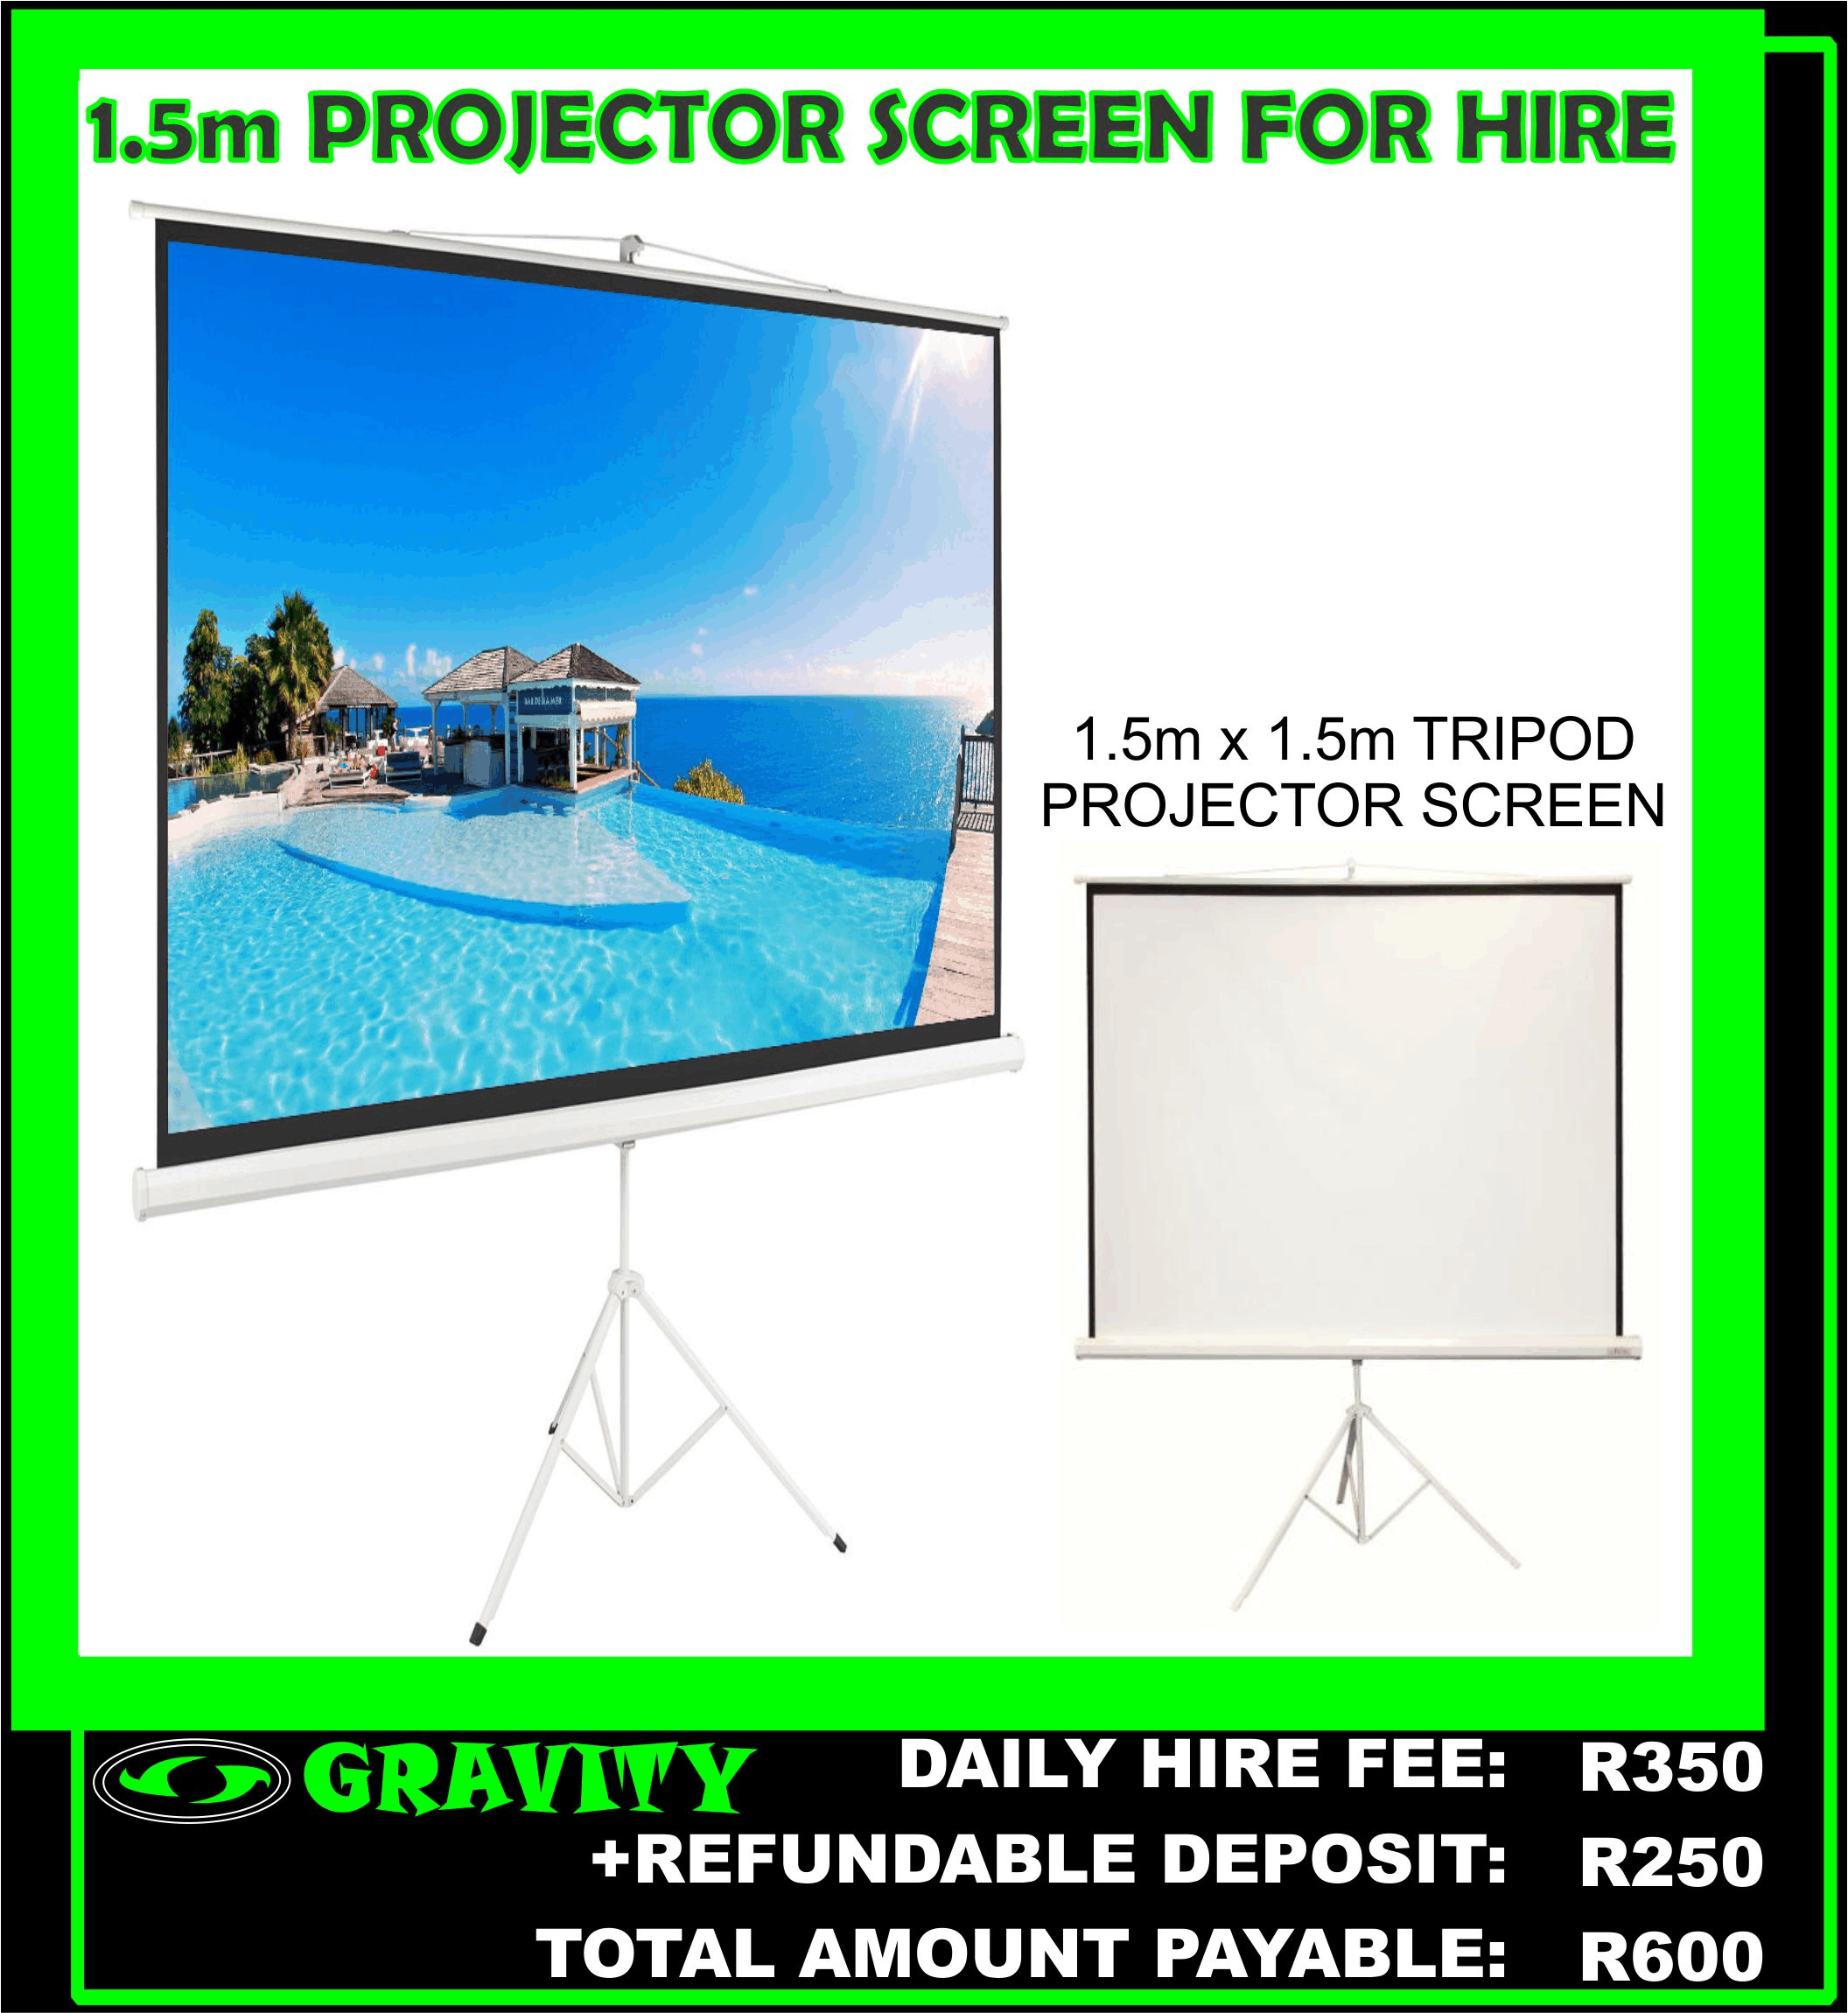 1.5m PROJECTOR SCREEN FOR HIRE IN DURBAN AREA NOW AVAILABLE ON DAILY HIRE AT GRAVITY SOUND AND LIGHTING WAREHOUSE DURBAN PHOENIX 0315072463  OR 0315072736  DAILY HIRE FEE: R350  1.5m TRIPOD PROJECTOR SCREEN ONLY